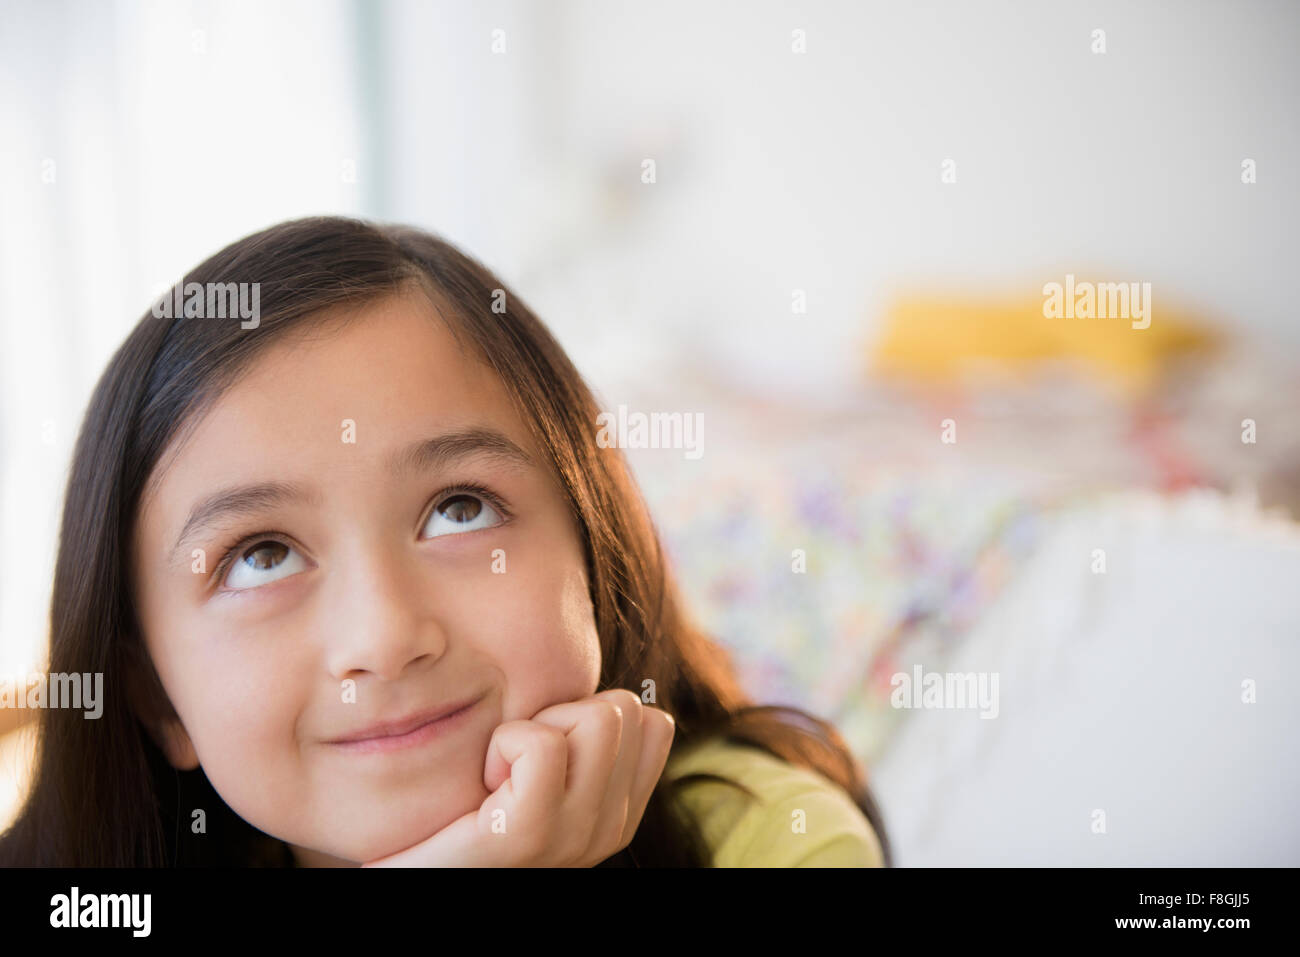 Smiling girl daydreaming with hand on chin Stock Photo